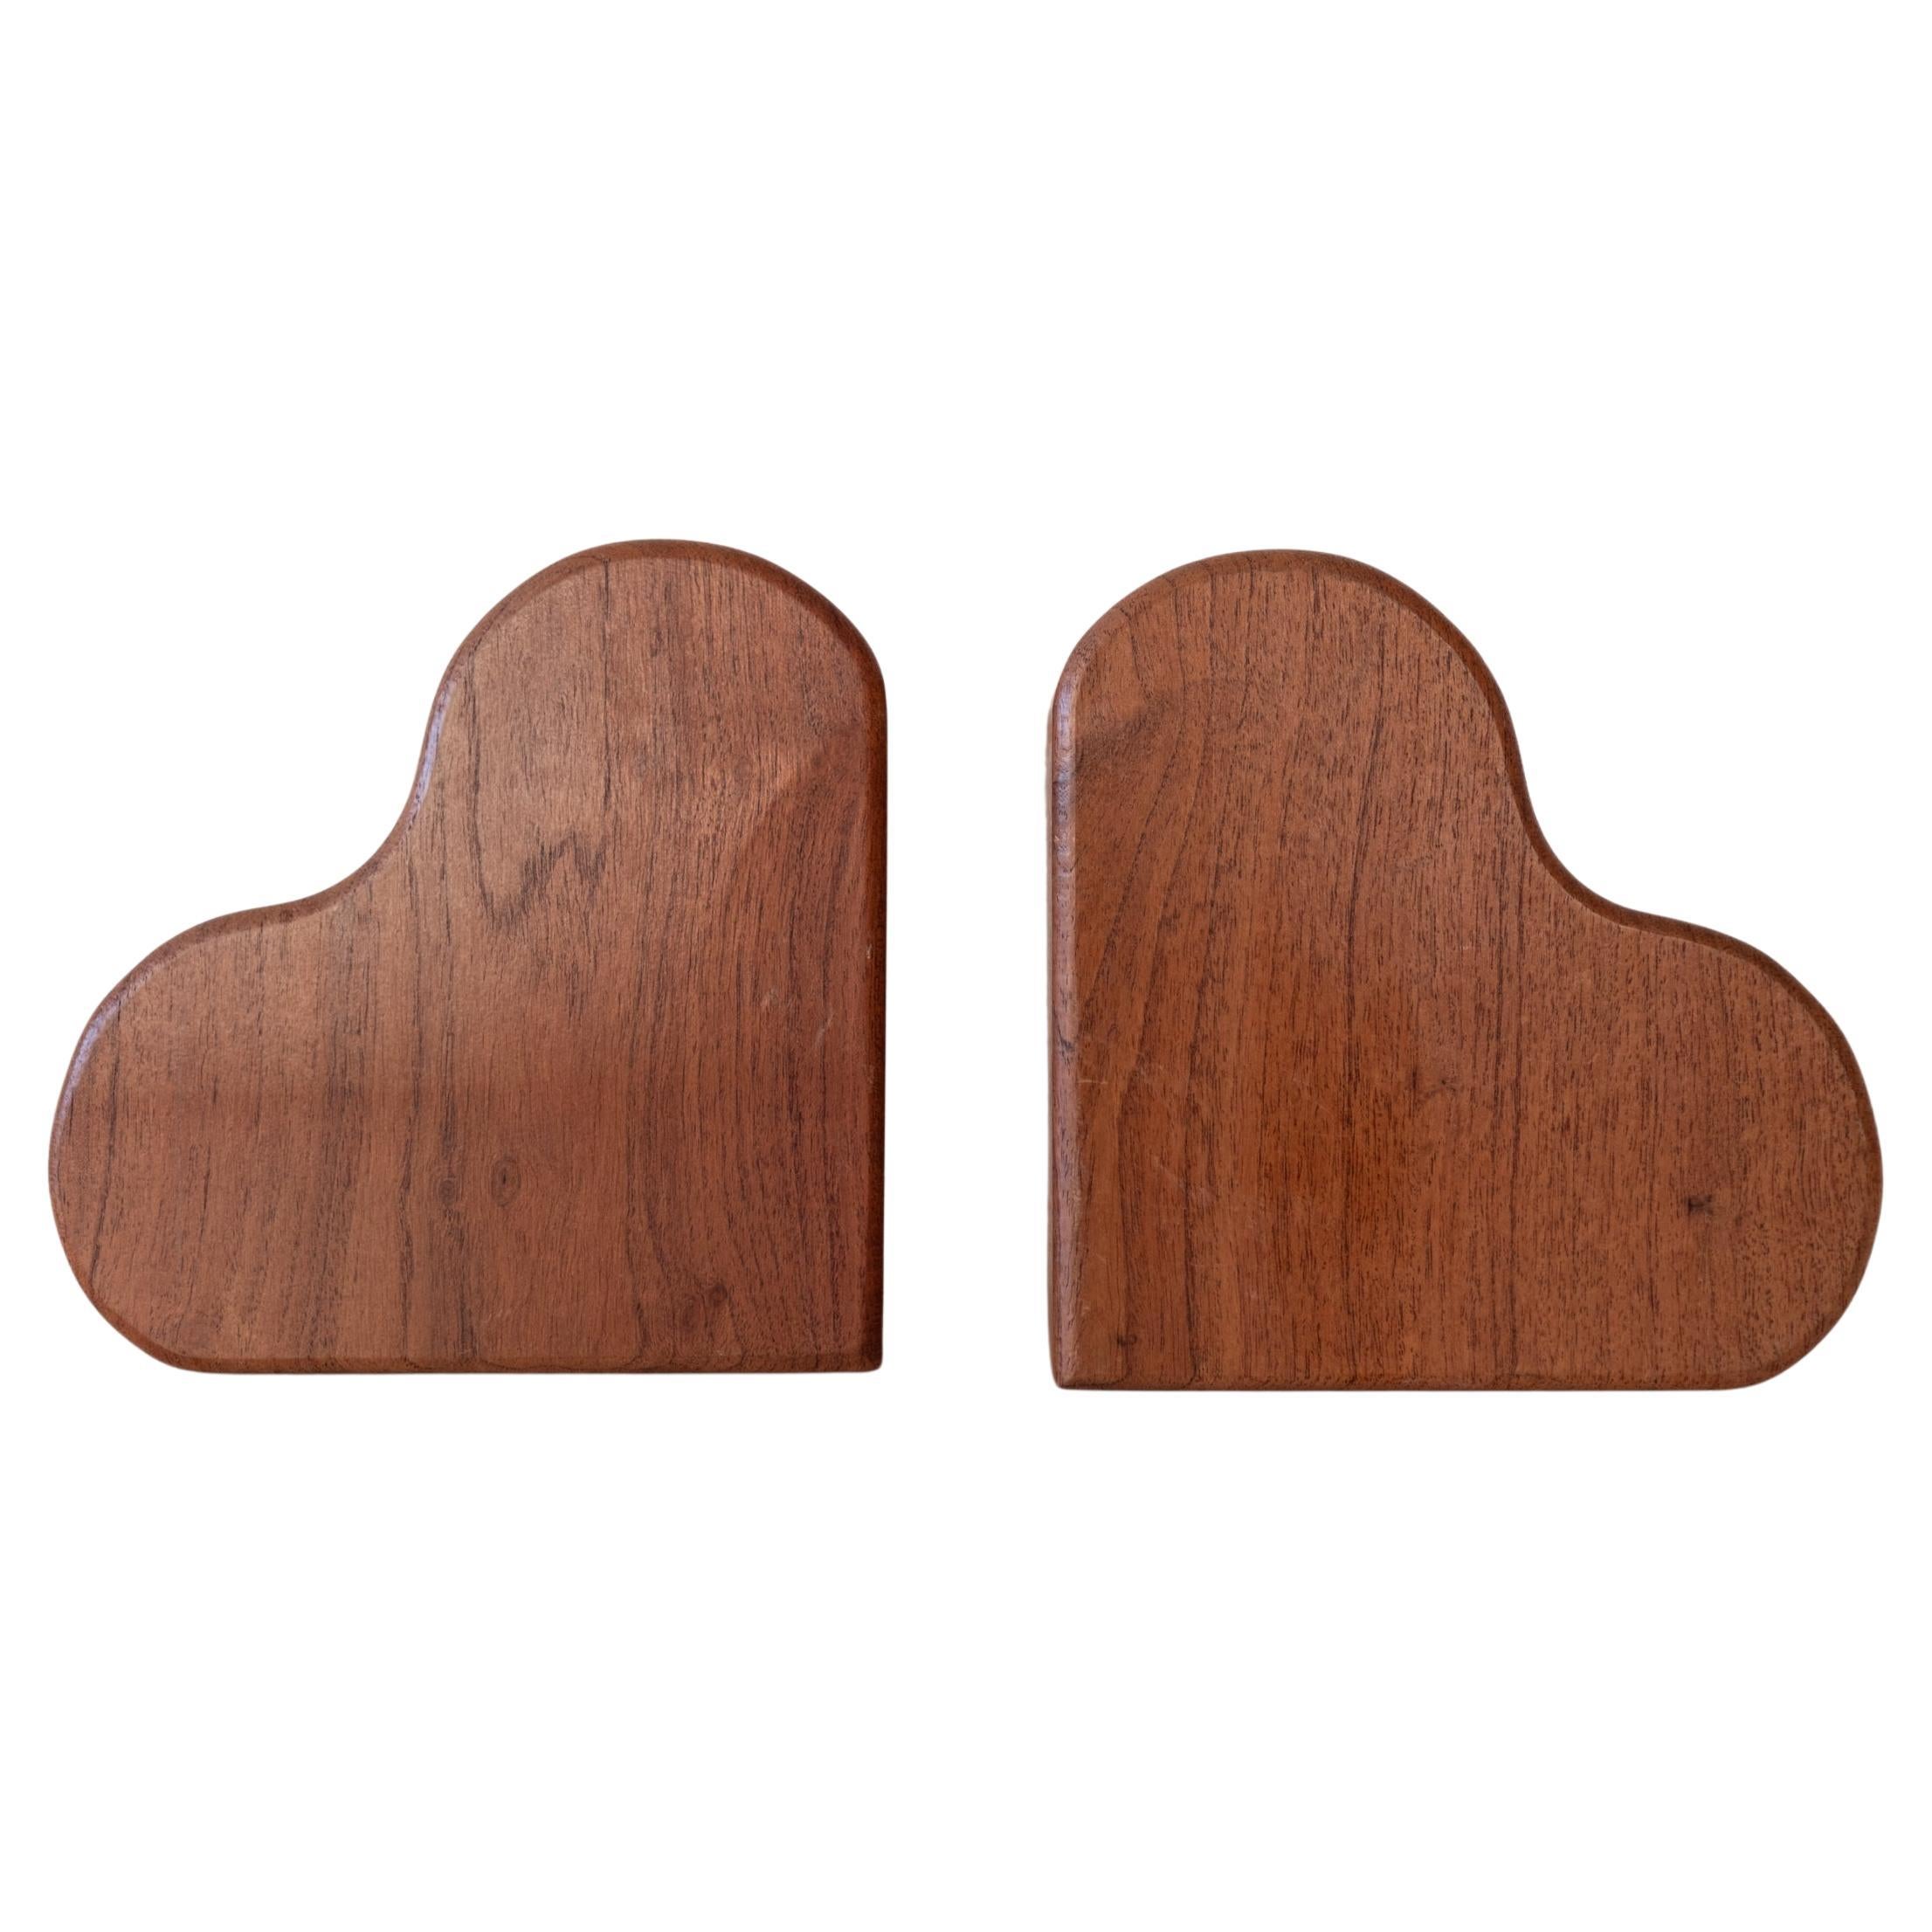 Studio Crafted Wood Heart Bookends 